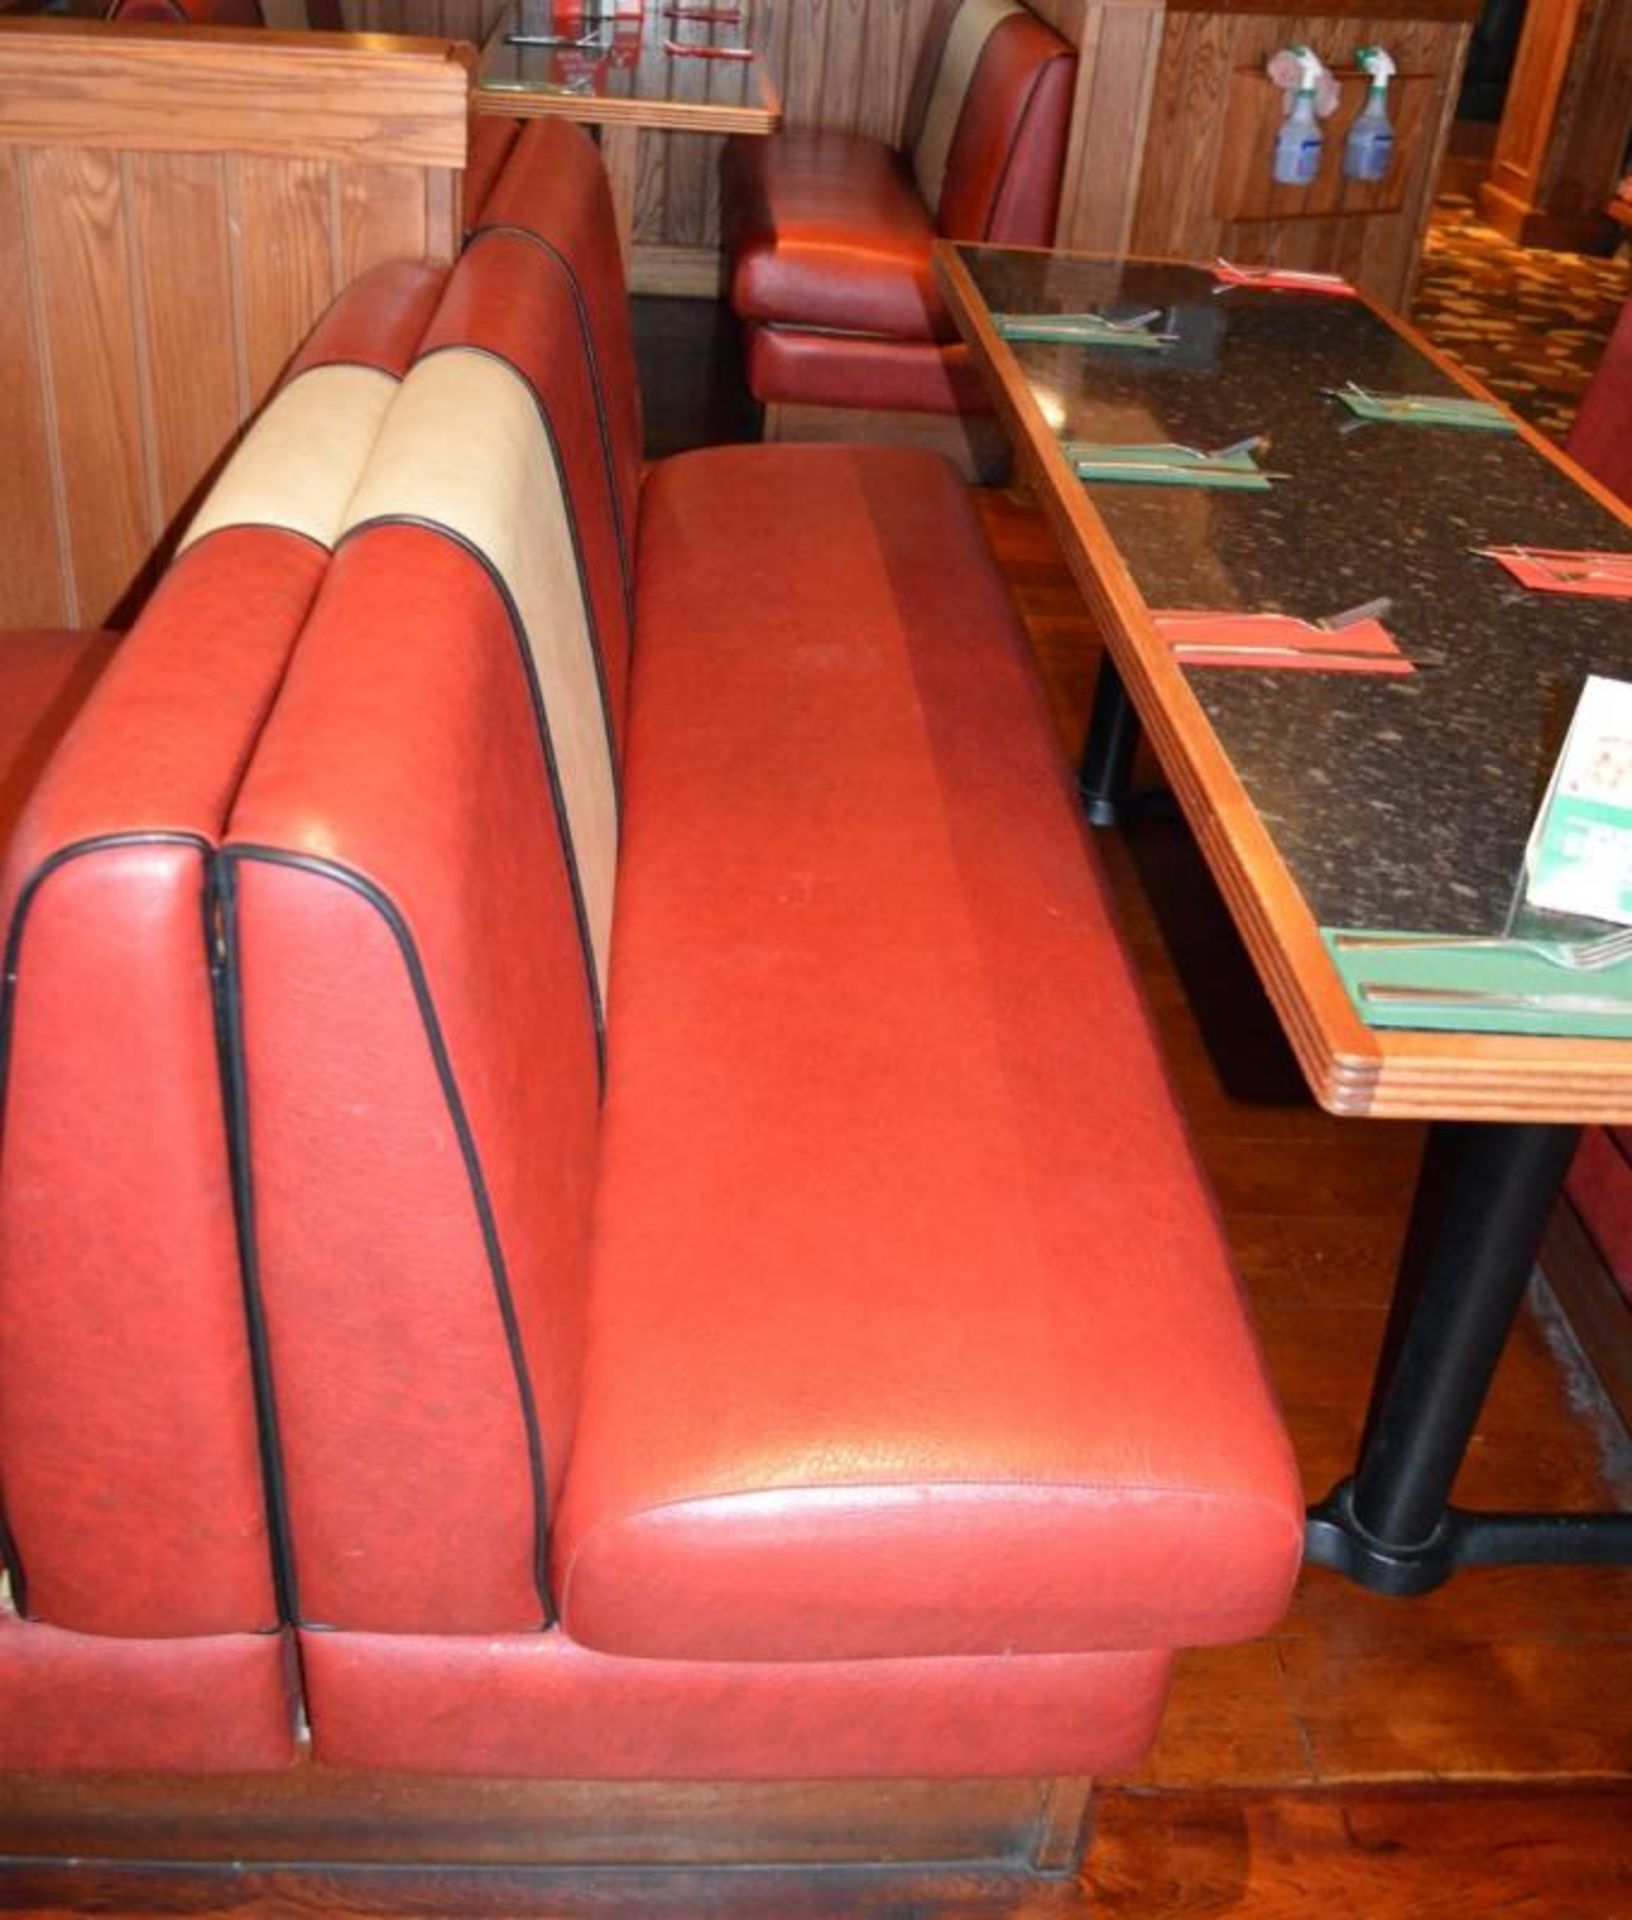 1 x Selection of Cosy Bespoke Seating Booths in a 1950's Retro American Diner Design With Dining Tab - Image 3 of 30